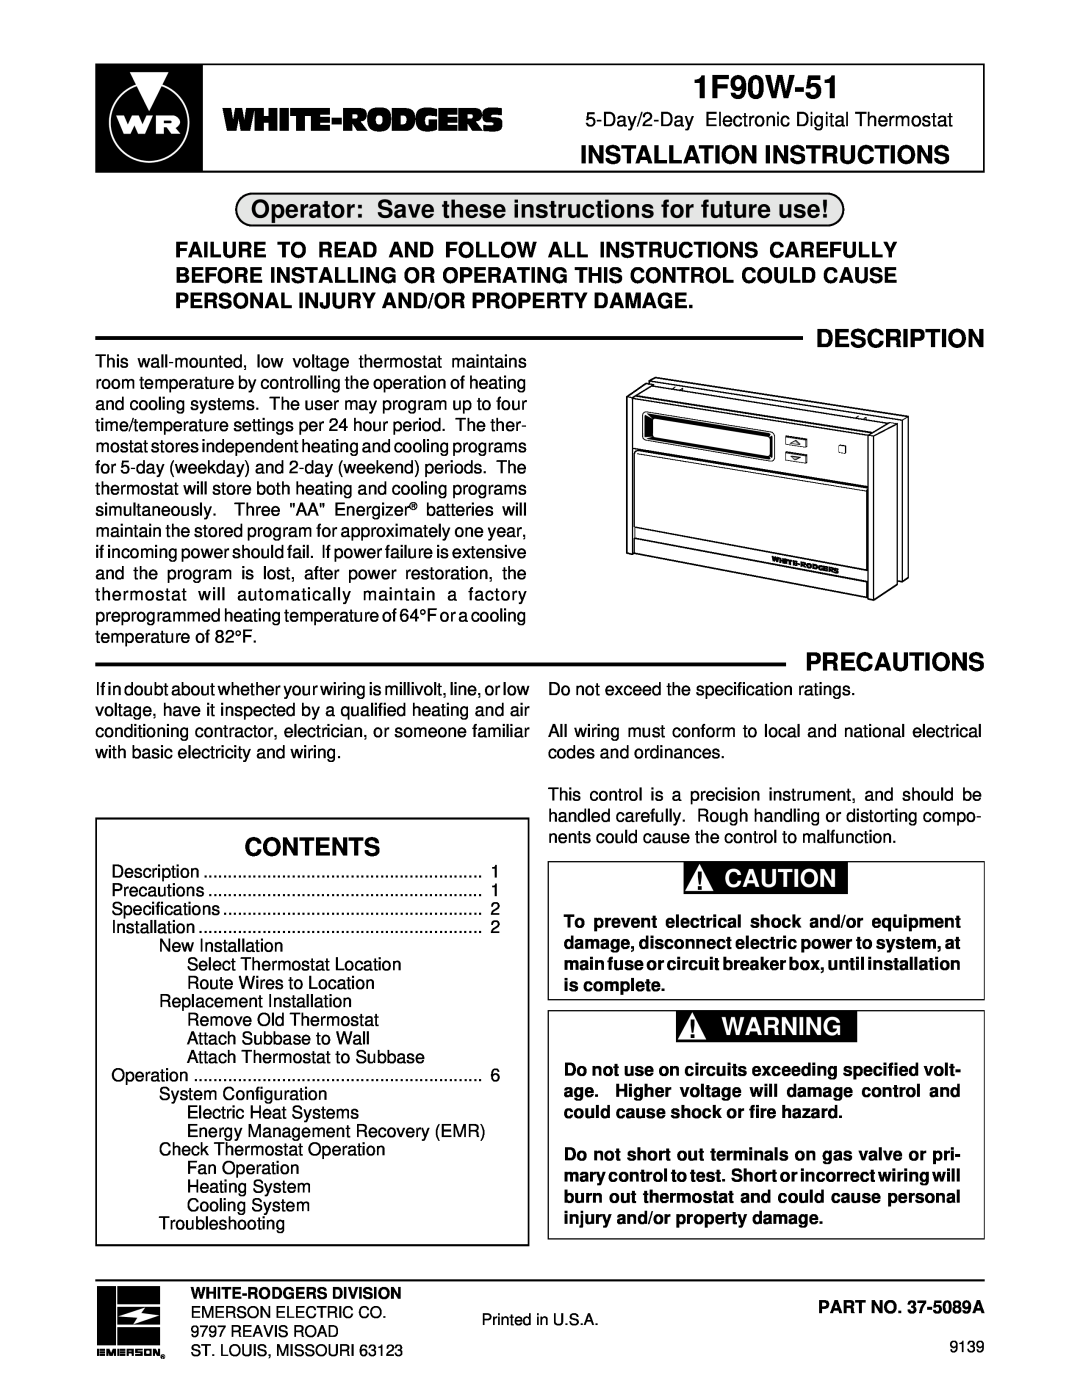 White Rodgers 1F90W-51 installation instructions Operator Save these instructions for future use, Description, Precautions 